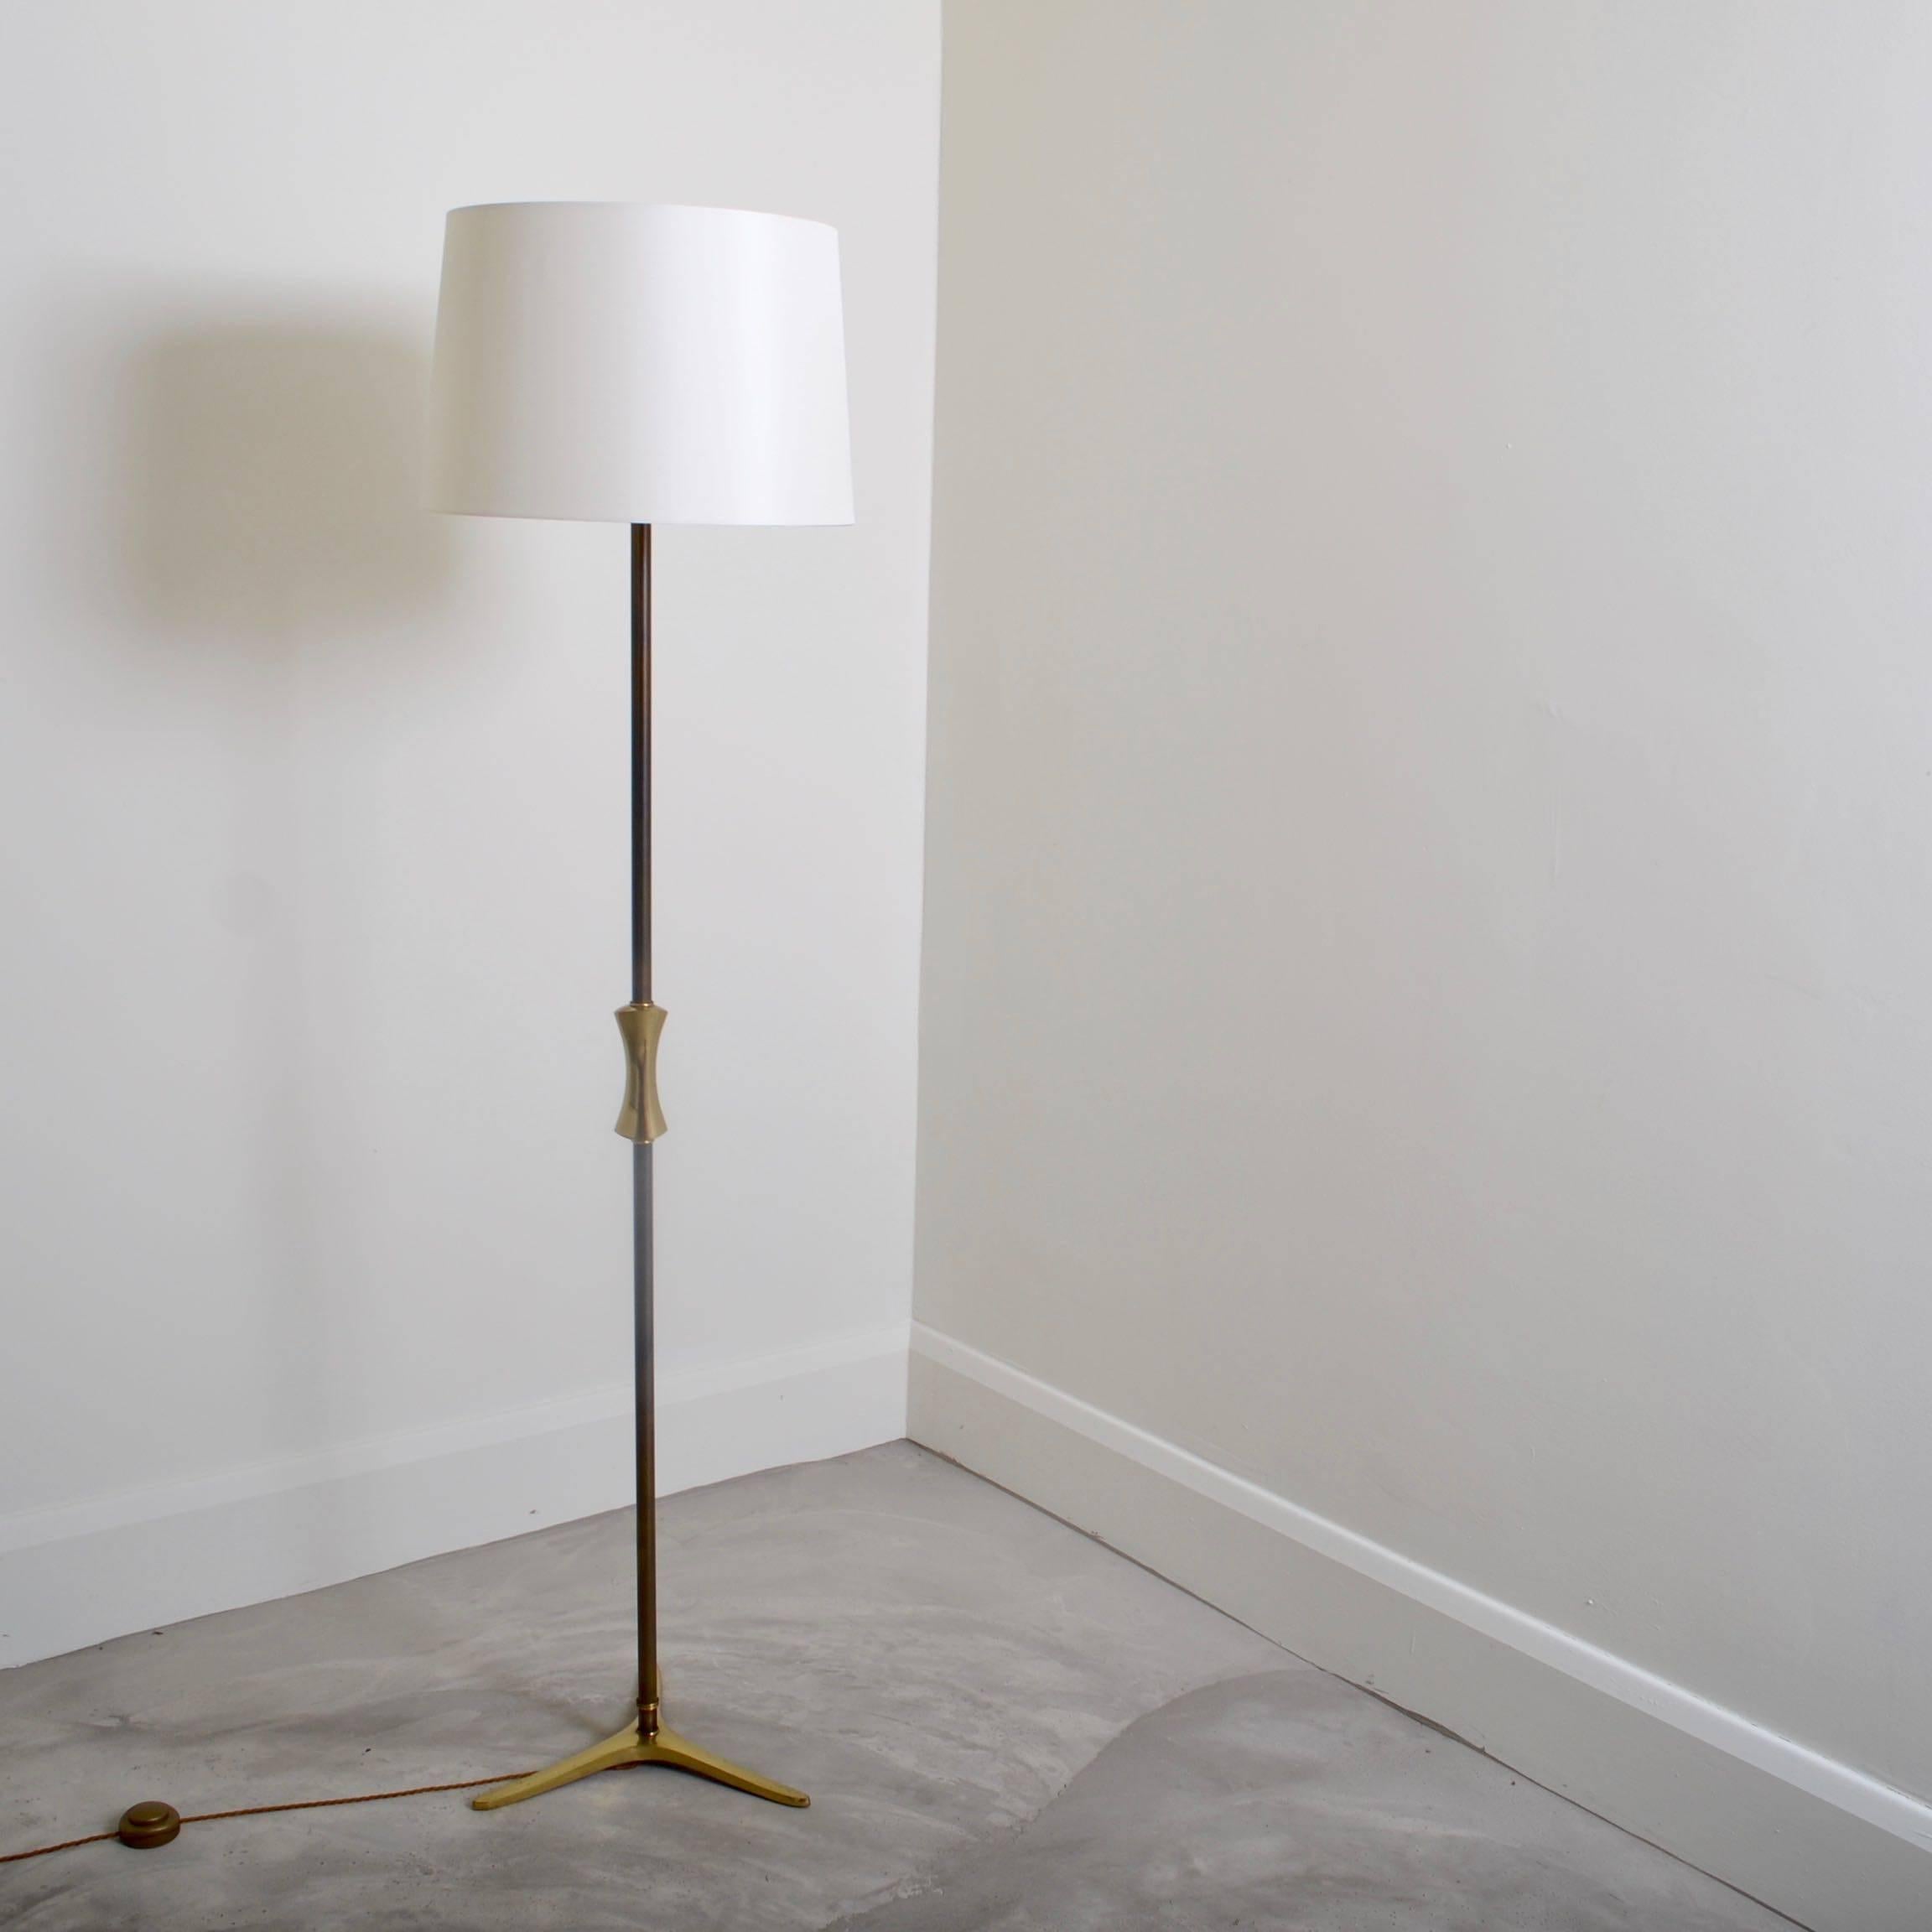 Lacquered brass floor lamp with tripod base and
new Oyster silk shade, re-wired to UK PAT safety standard.
Designed and manufactured by Maison Charles,
Paris, 1970





.